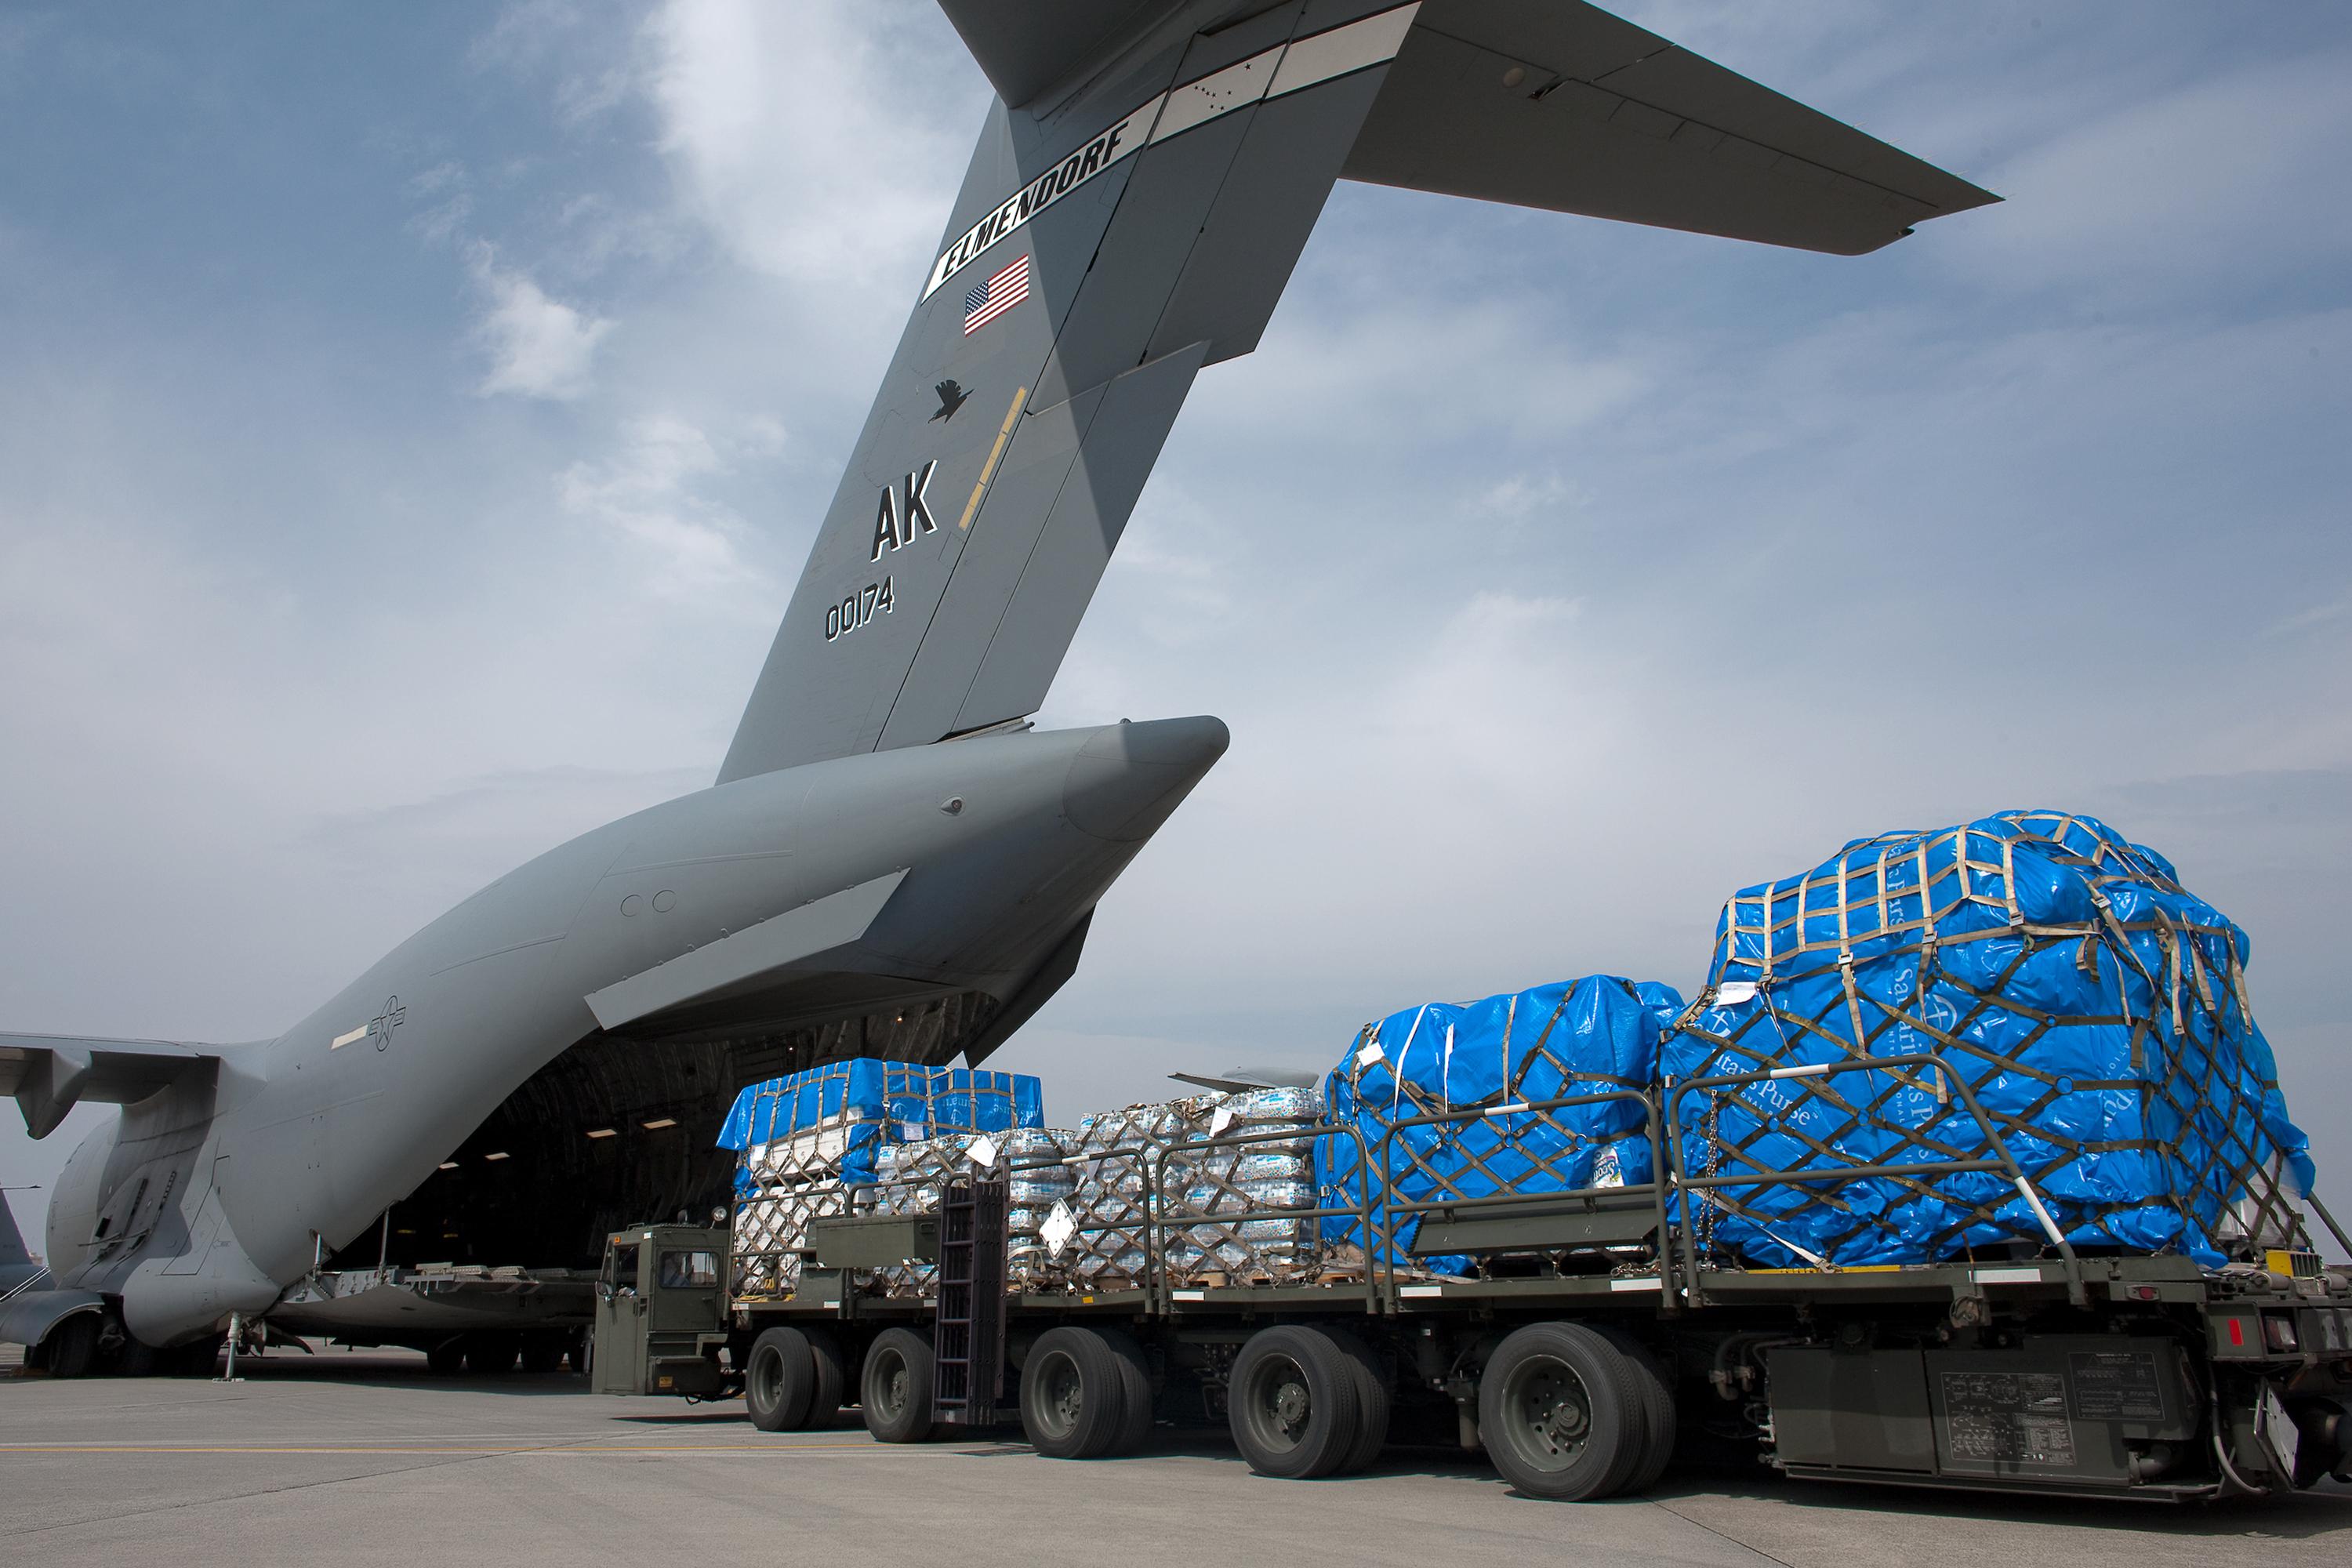 Loading Humanitarian Relief Supplies to be Delivered to Sendai, Japan by Yasuo Osakabe